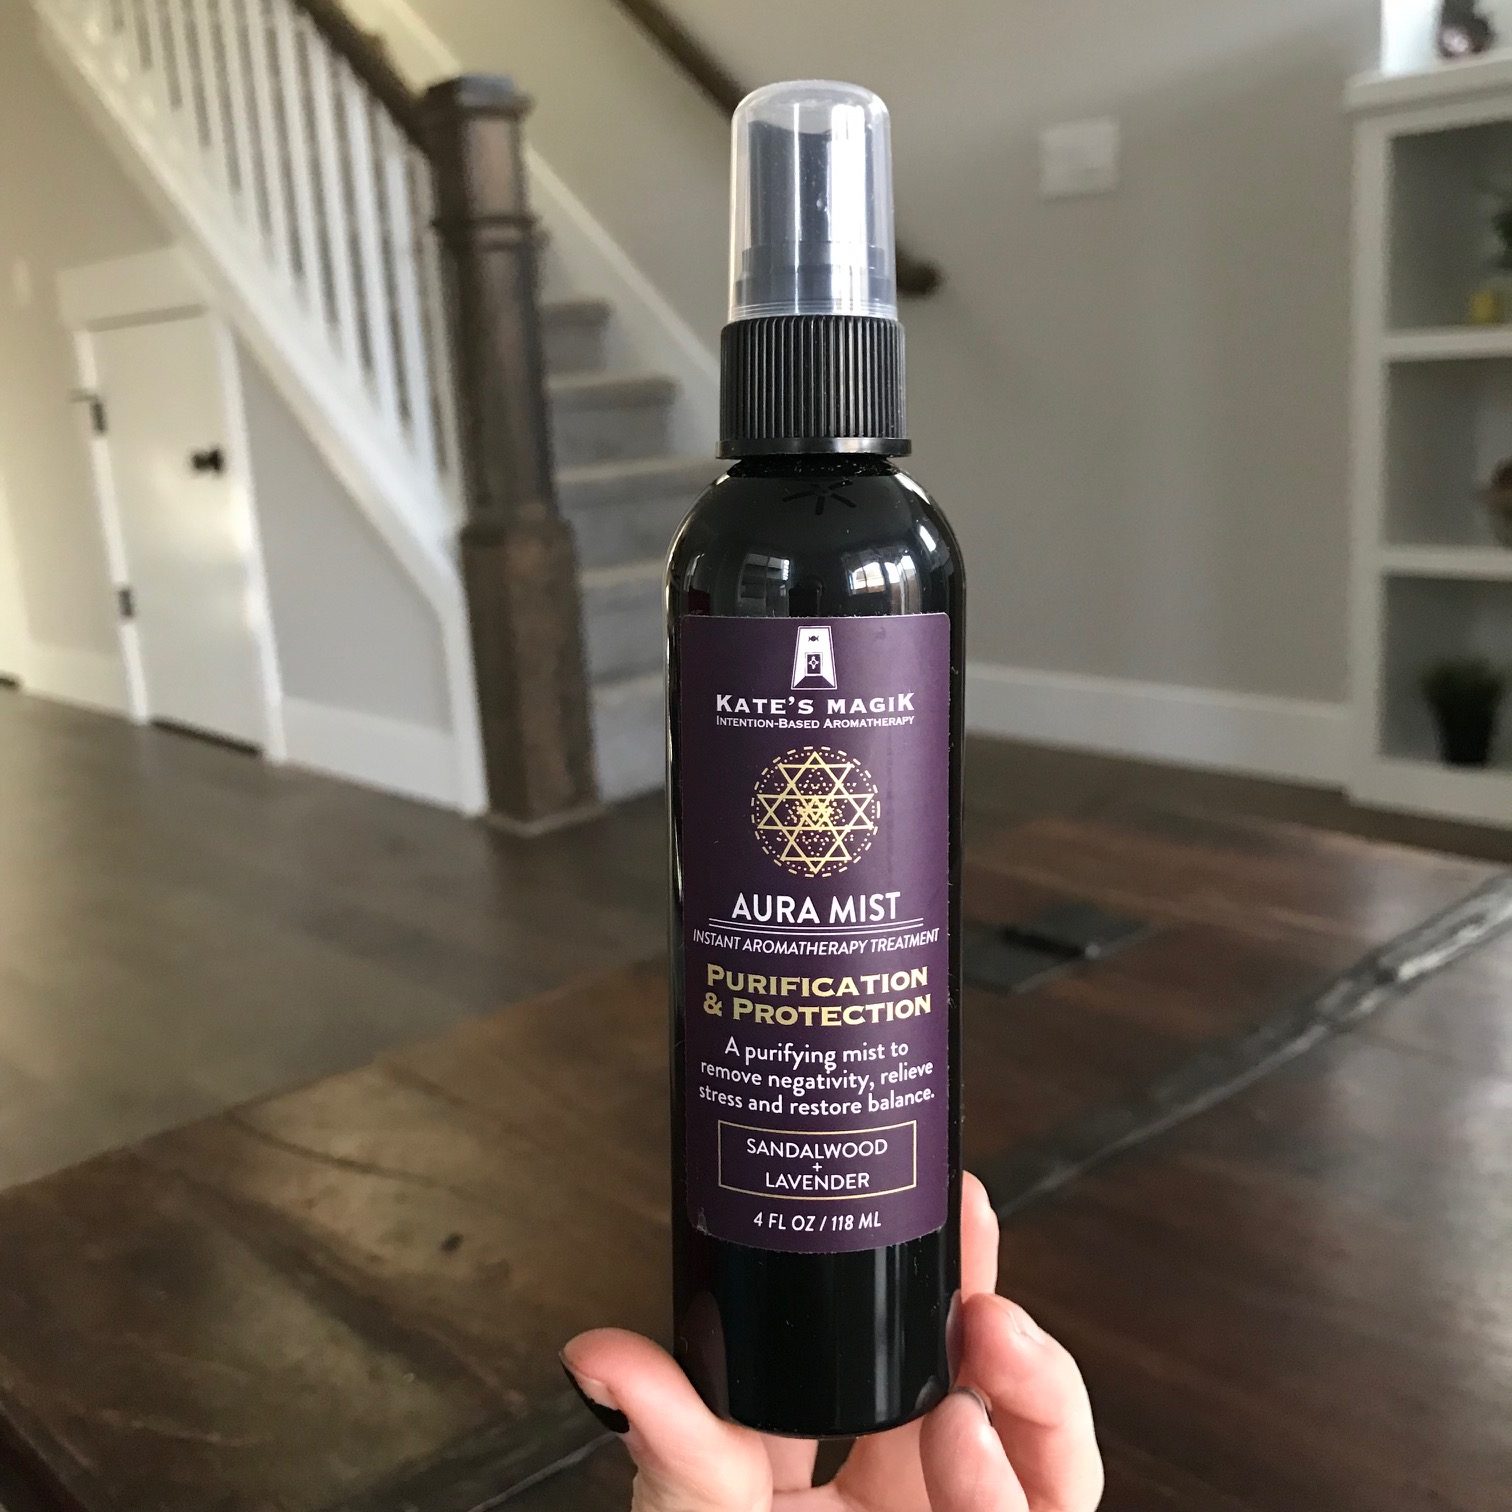 Kate's Magic Purification and Protection Aura Mist